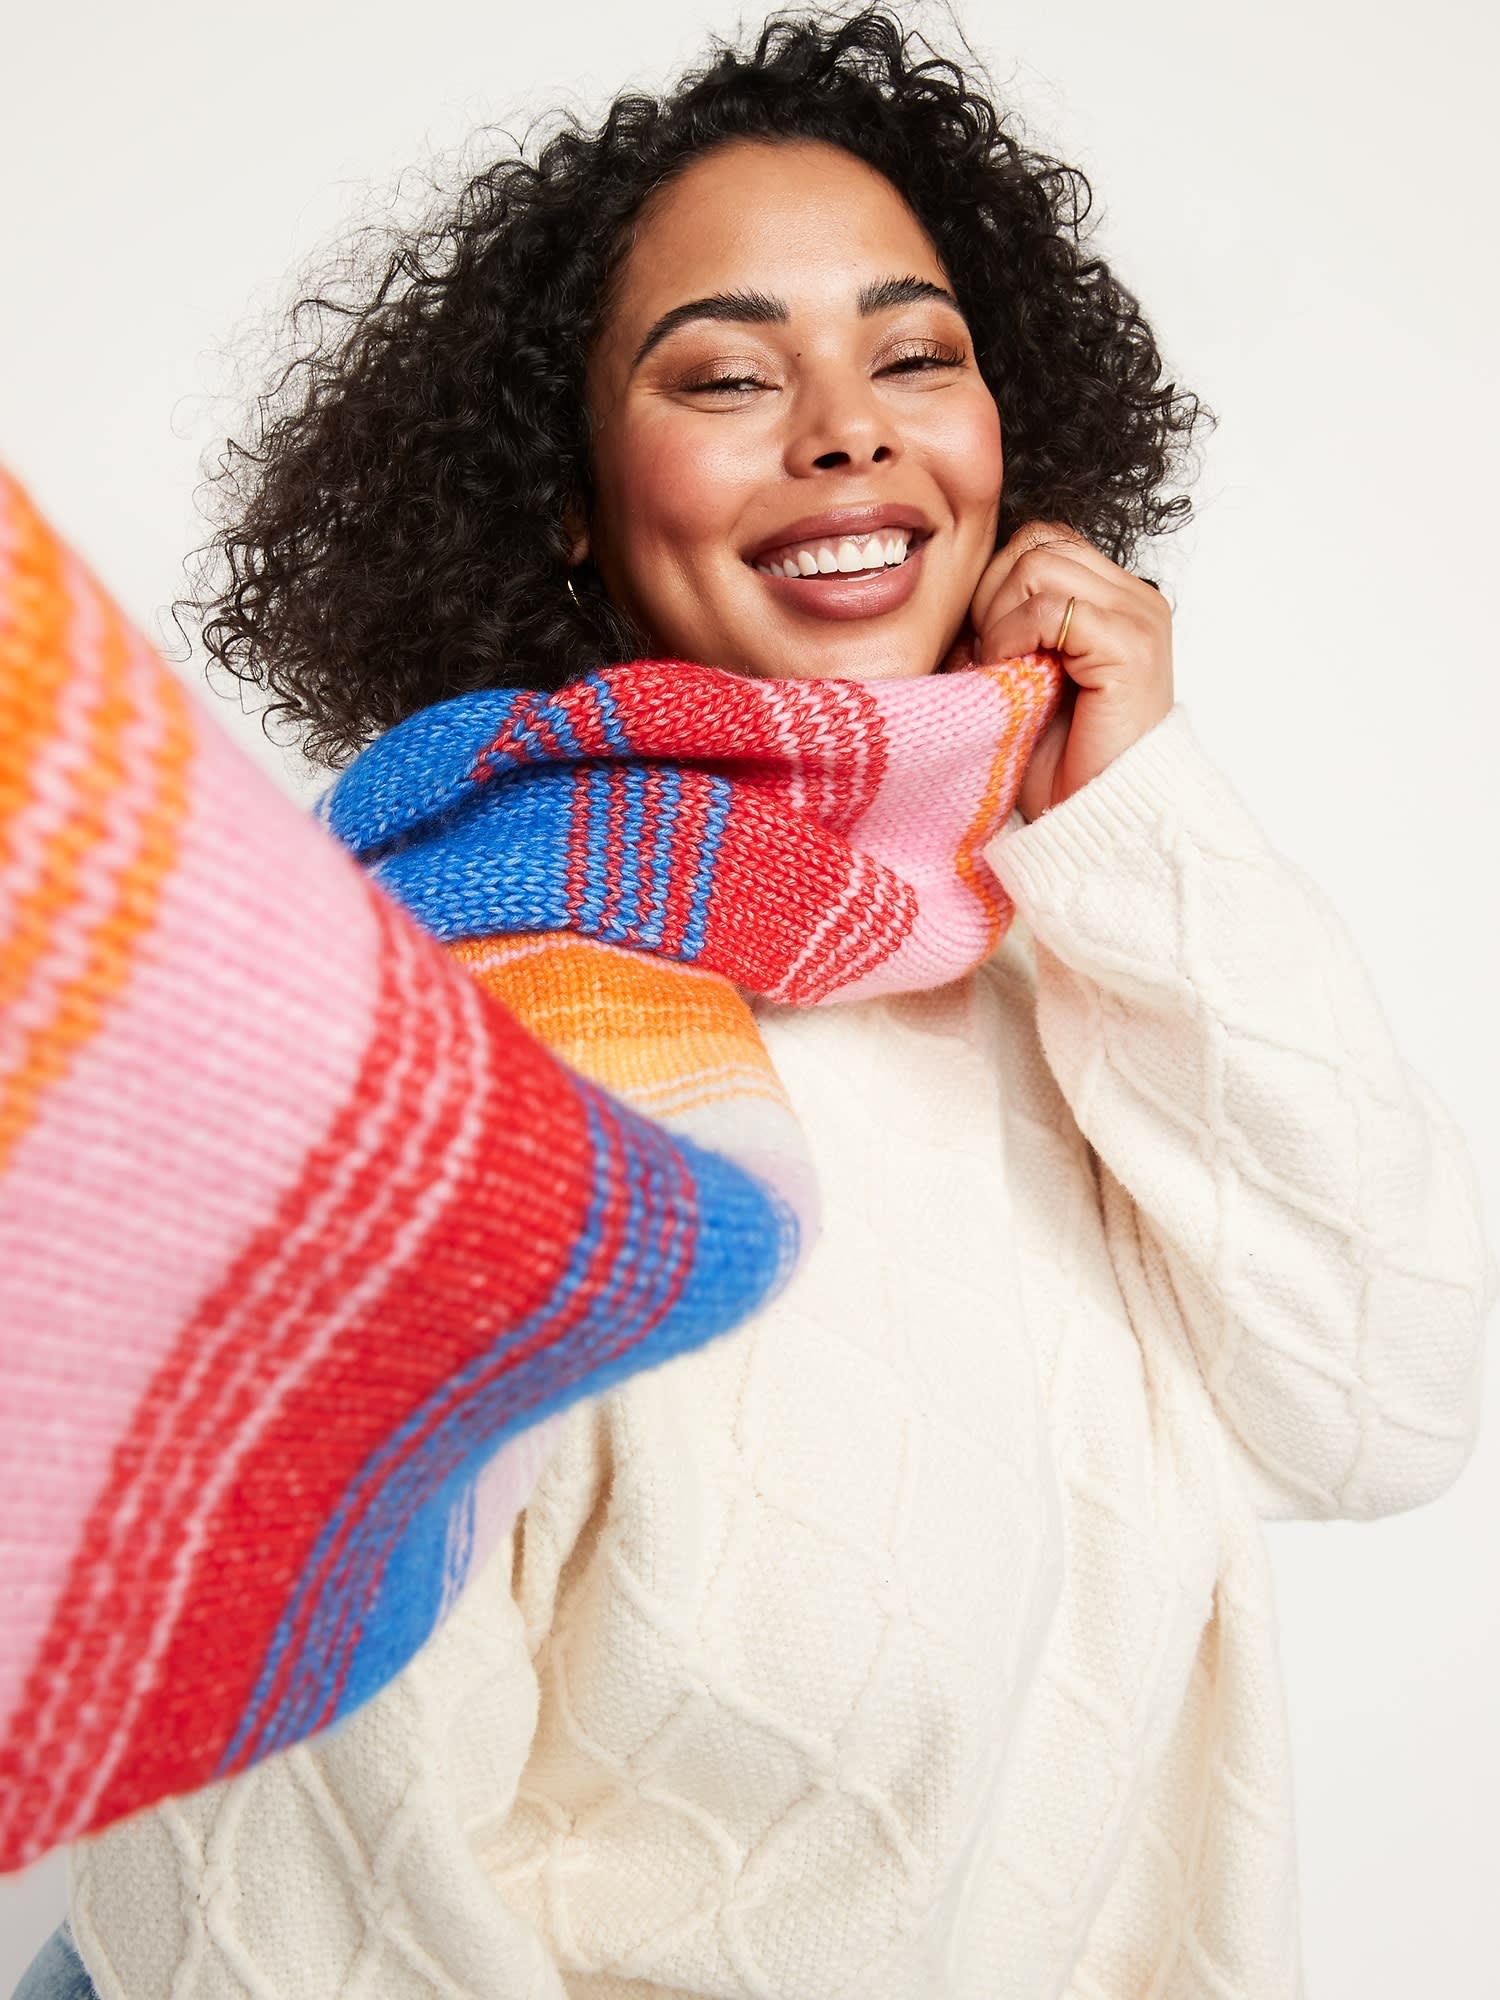 18 warm winter scarves for women in 2021 - TODAY